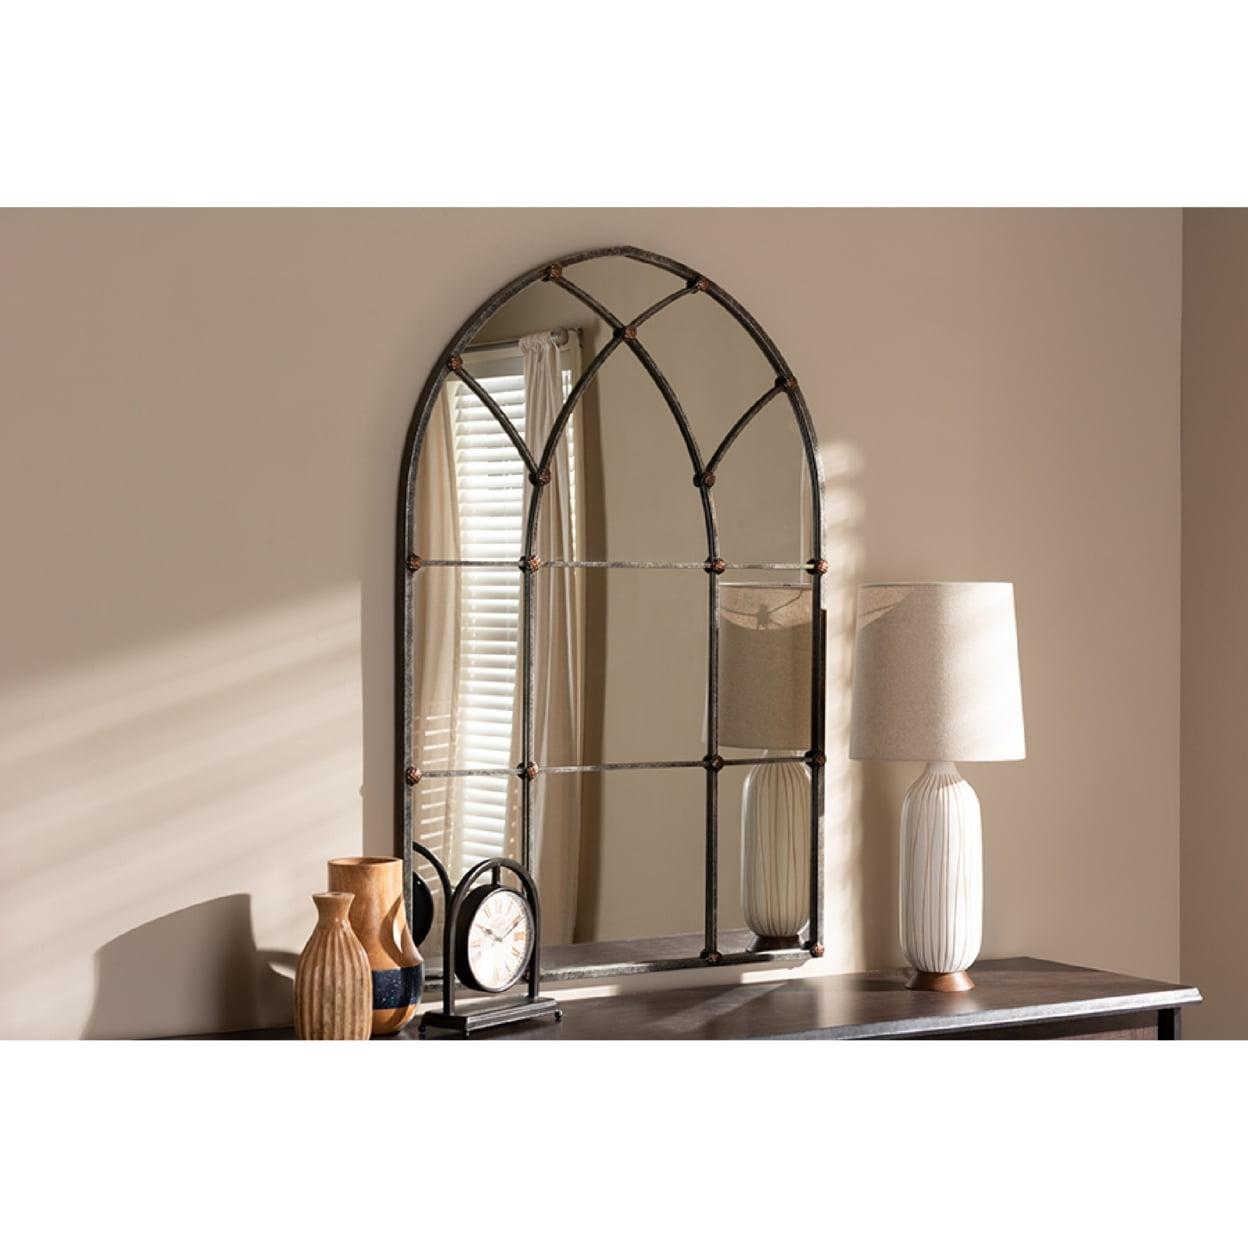 Antique Silver Arched Window-Inspired Wall Mirror with Leather Accents